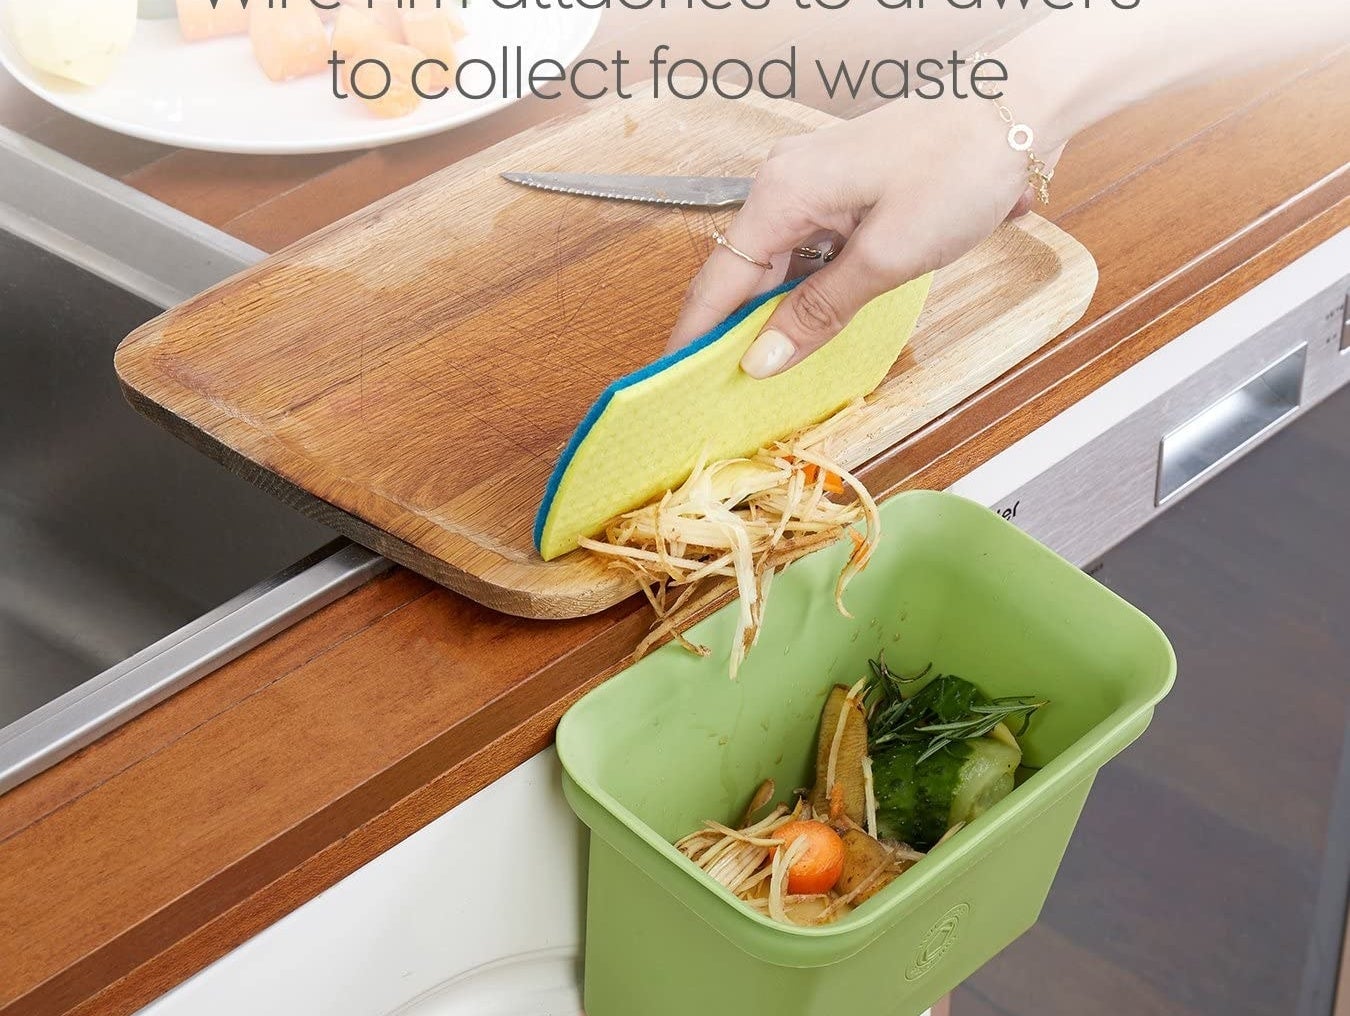 A person scraping vegetable scraps in a bin hanging off the edge of a counter